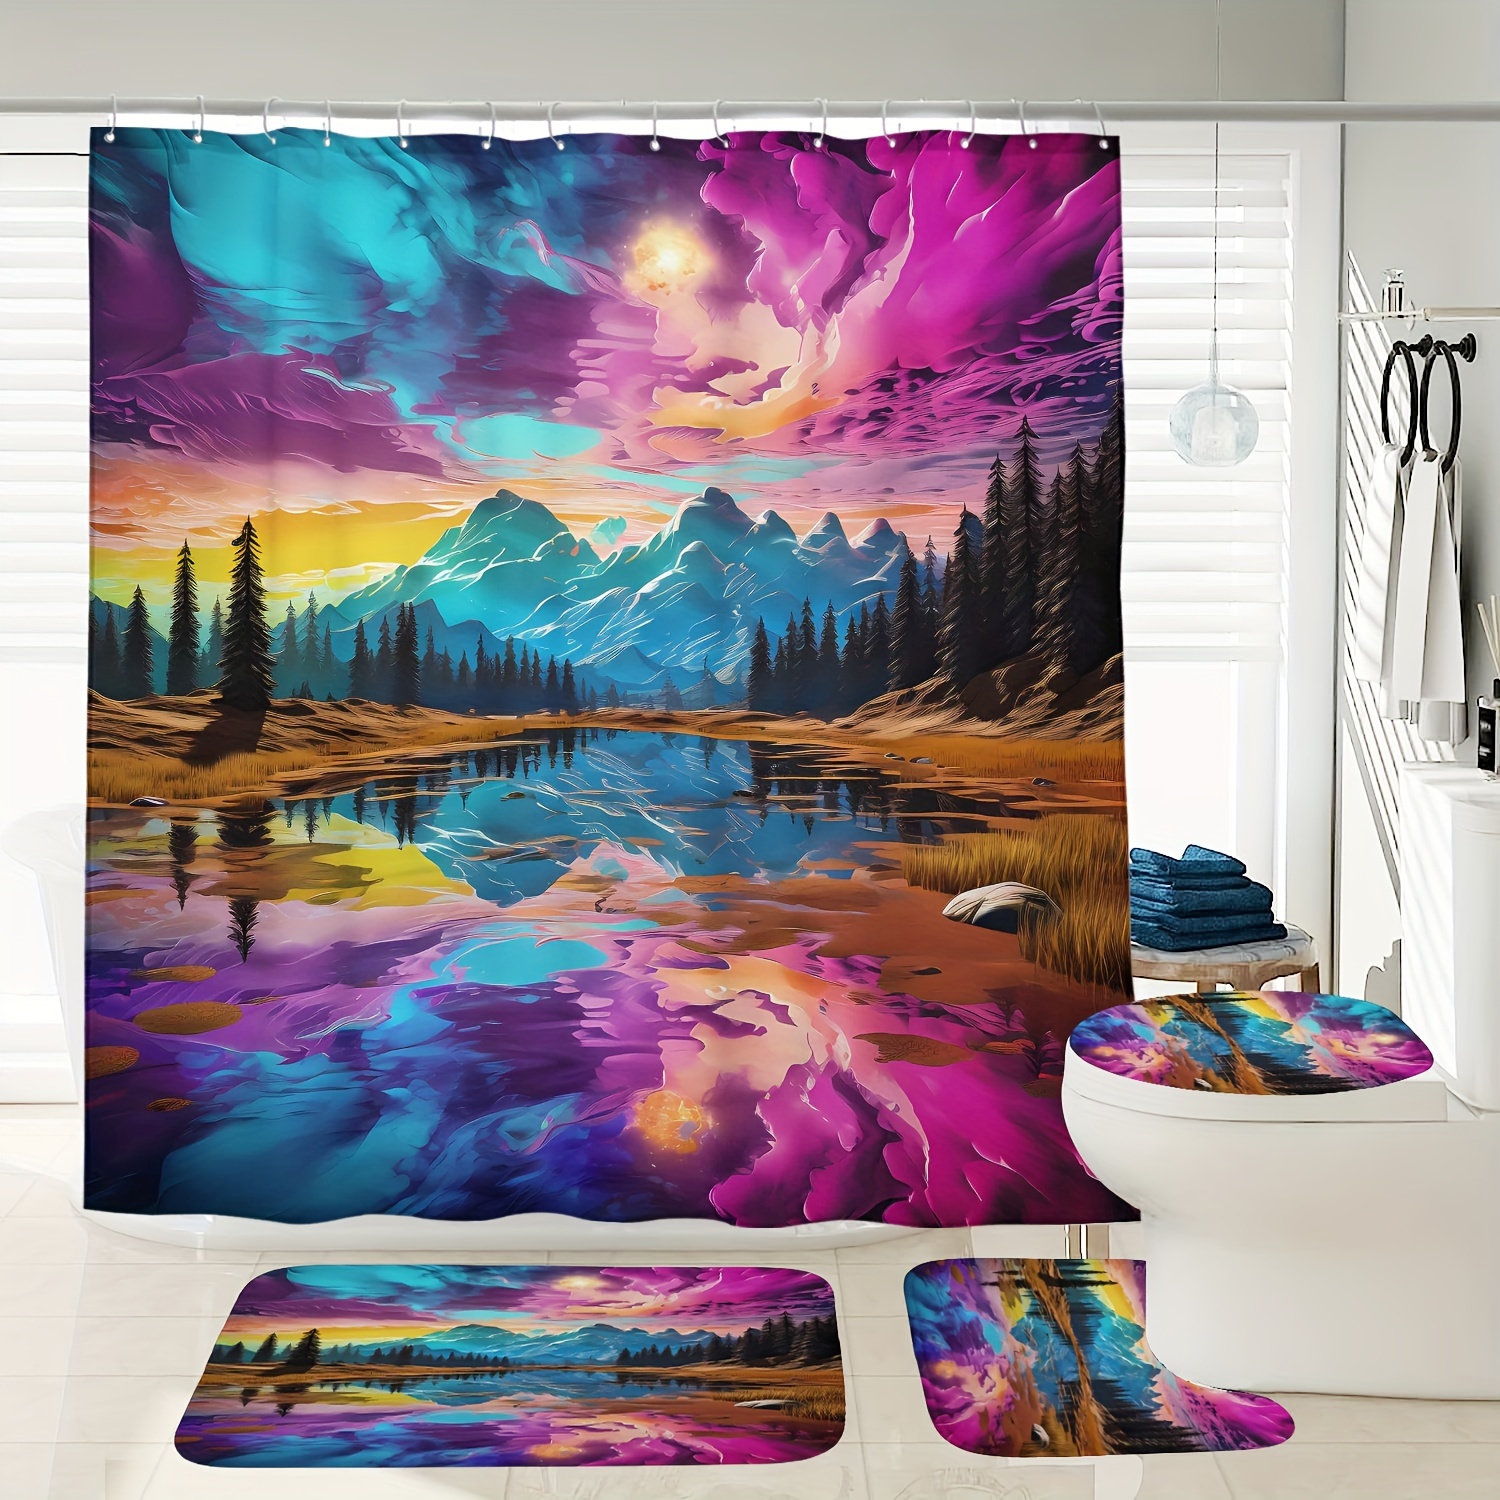 

1/4pcs Colorful Clouds Mountain Pattern Shower Curtain Set, Waterproof Shower Curtain With Hooks, Non-slip Bath Rug, U-shape Mat, Toilet Lid Cover Pad, Home Decor, Bathroom Accessories